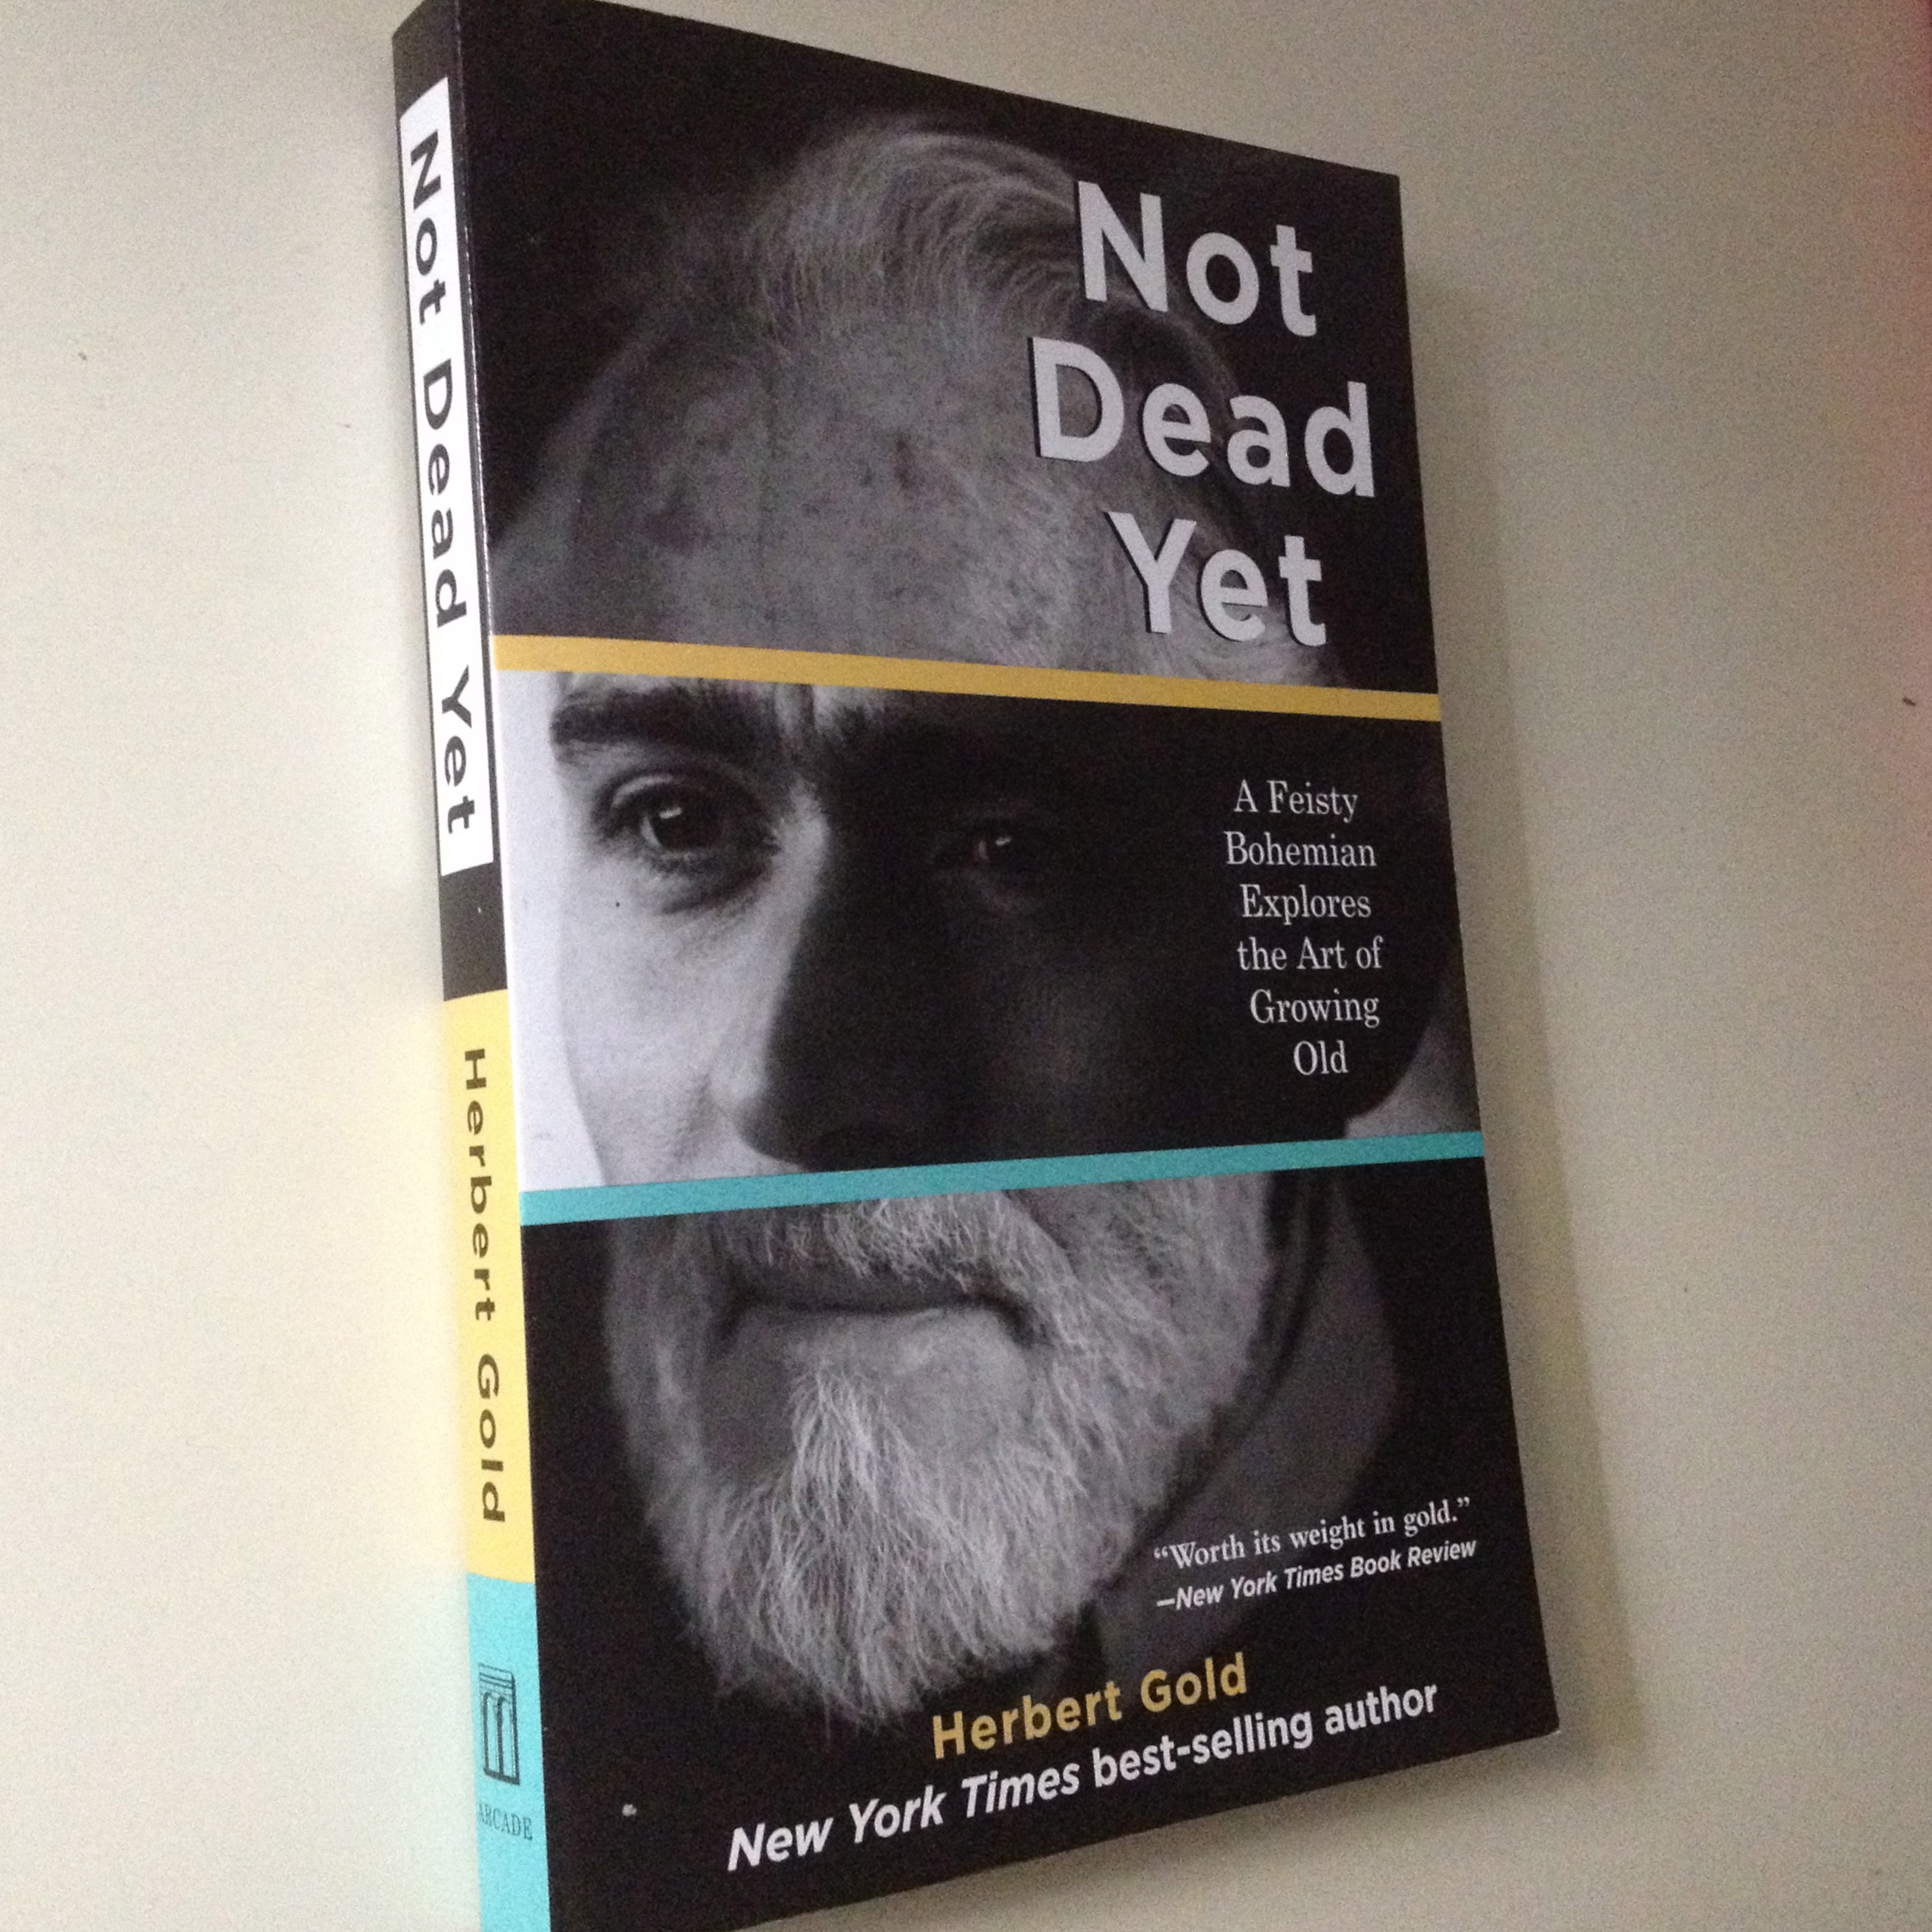   Not Dead Yet: A Feisty Bohemian Explores the Art of Growing Old - BUY NOW  